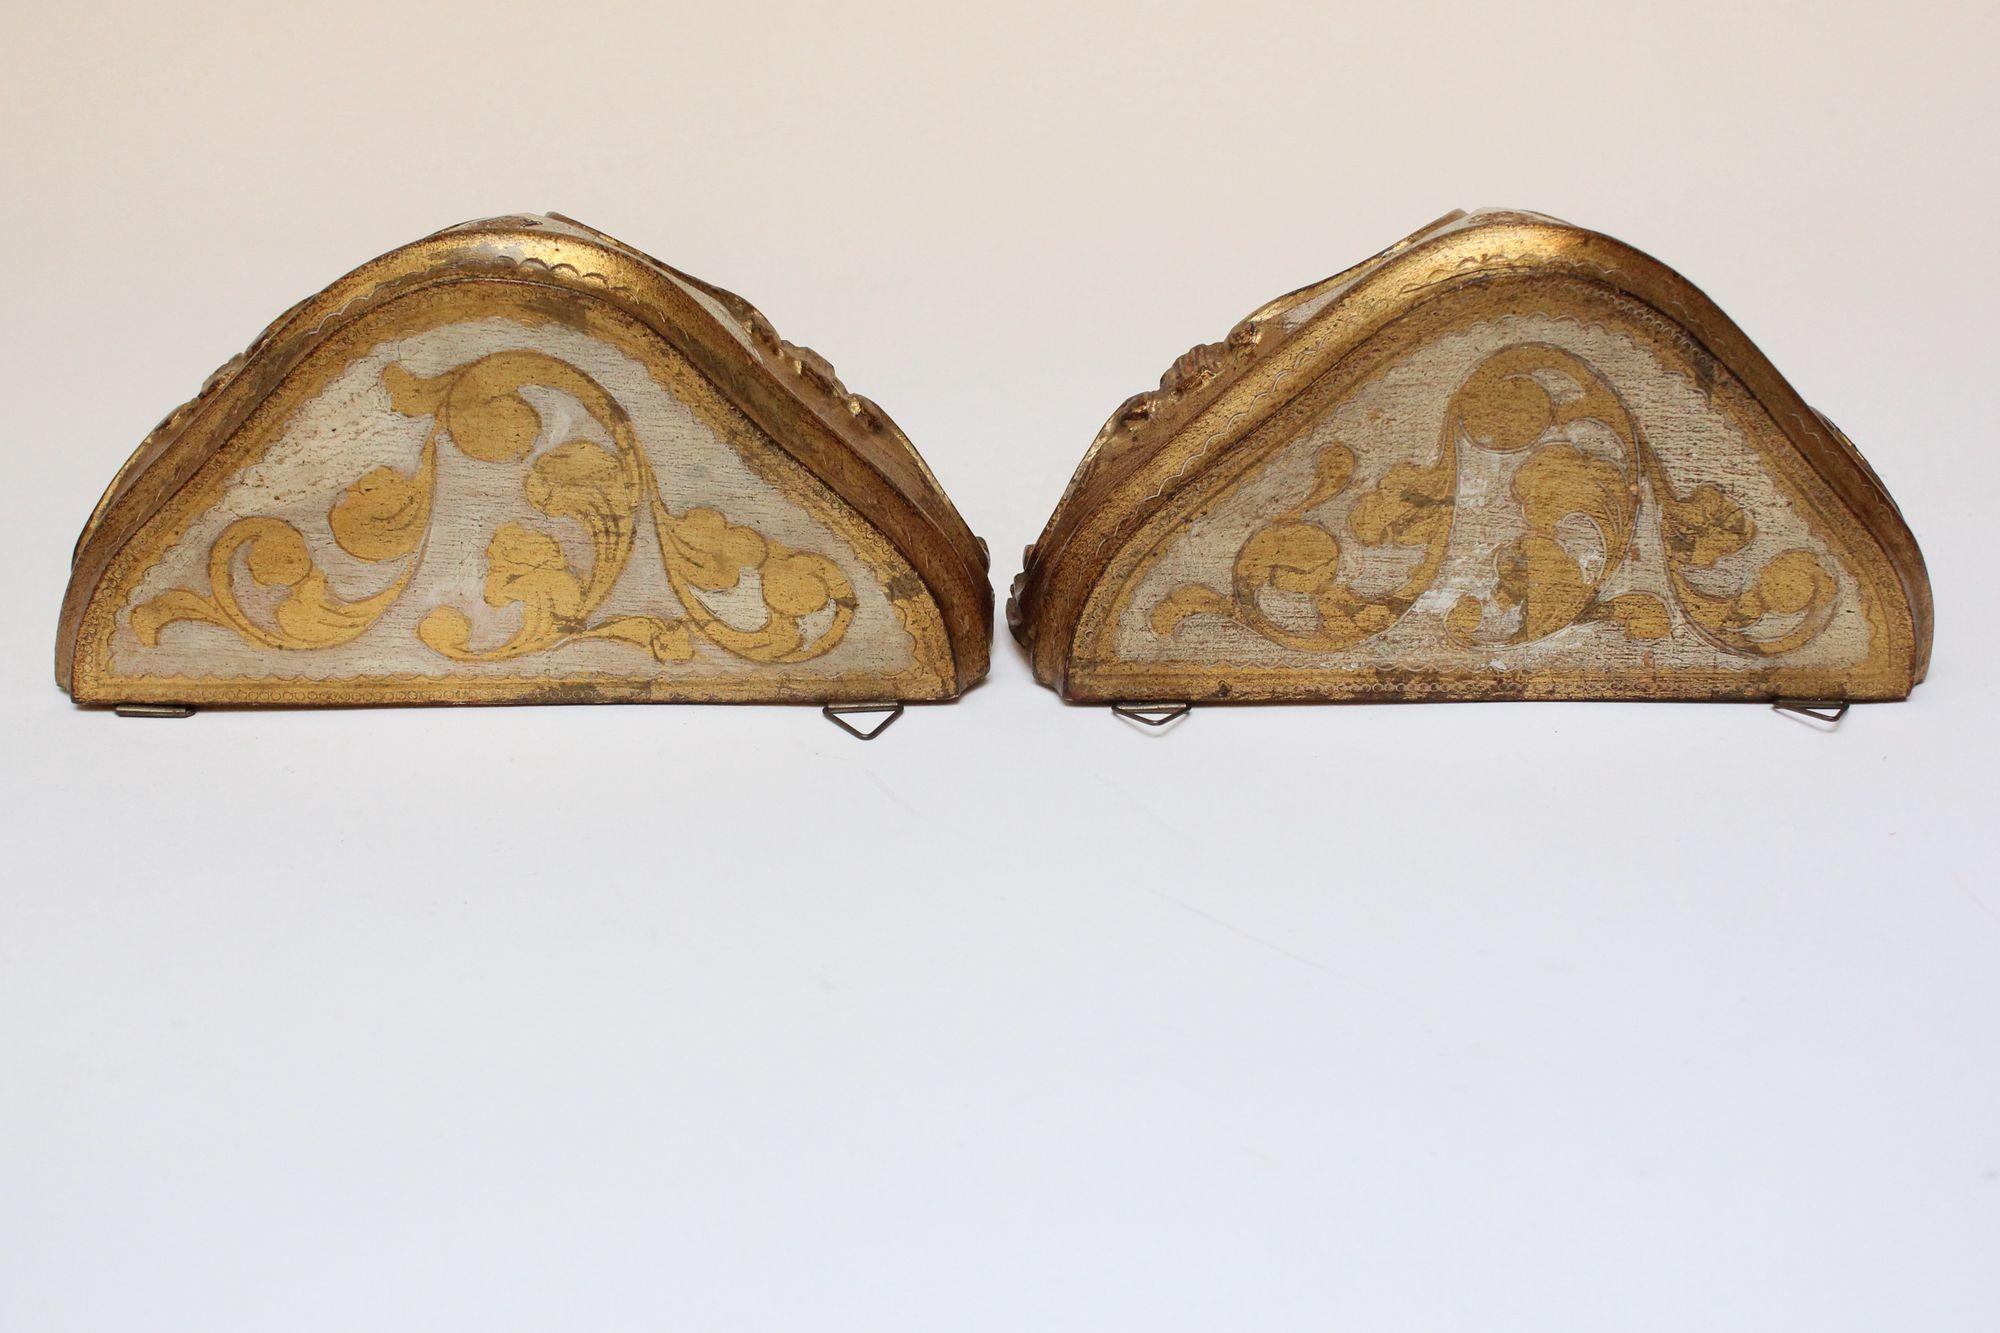 Pair of Vintage Florentine Giltwood Wall Brackets/Shelves with Rocaille Flourish For Sale 3